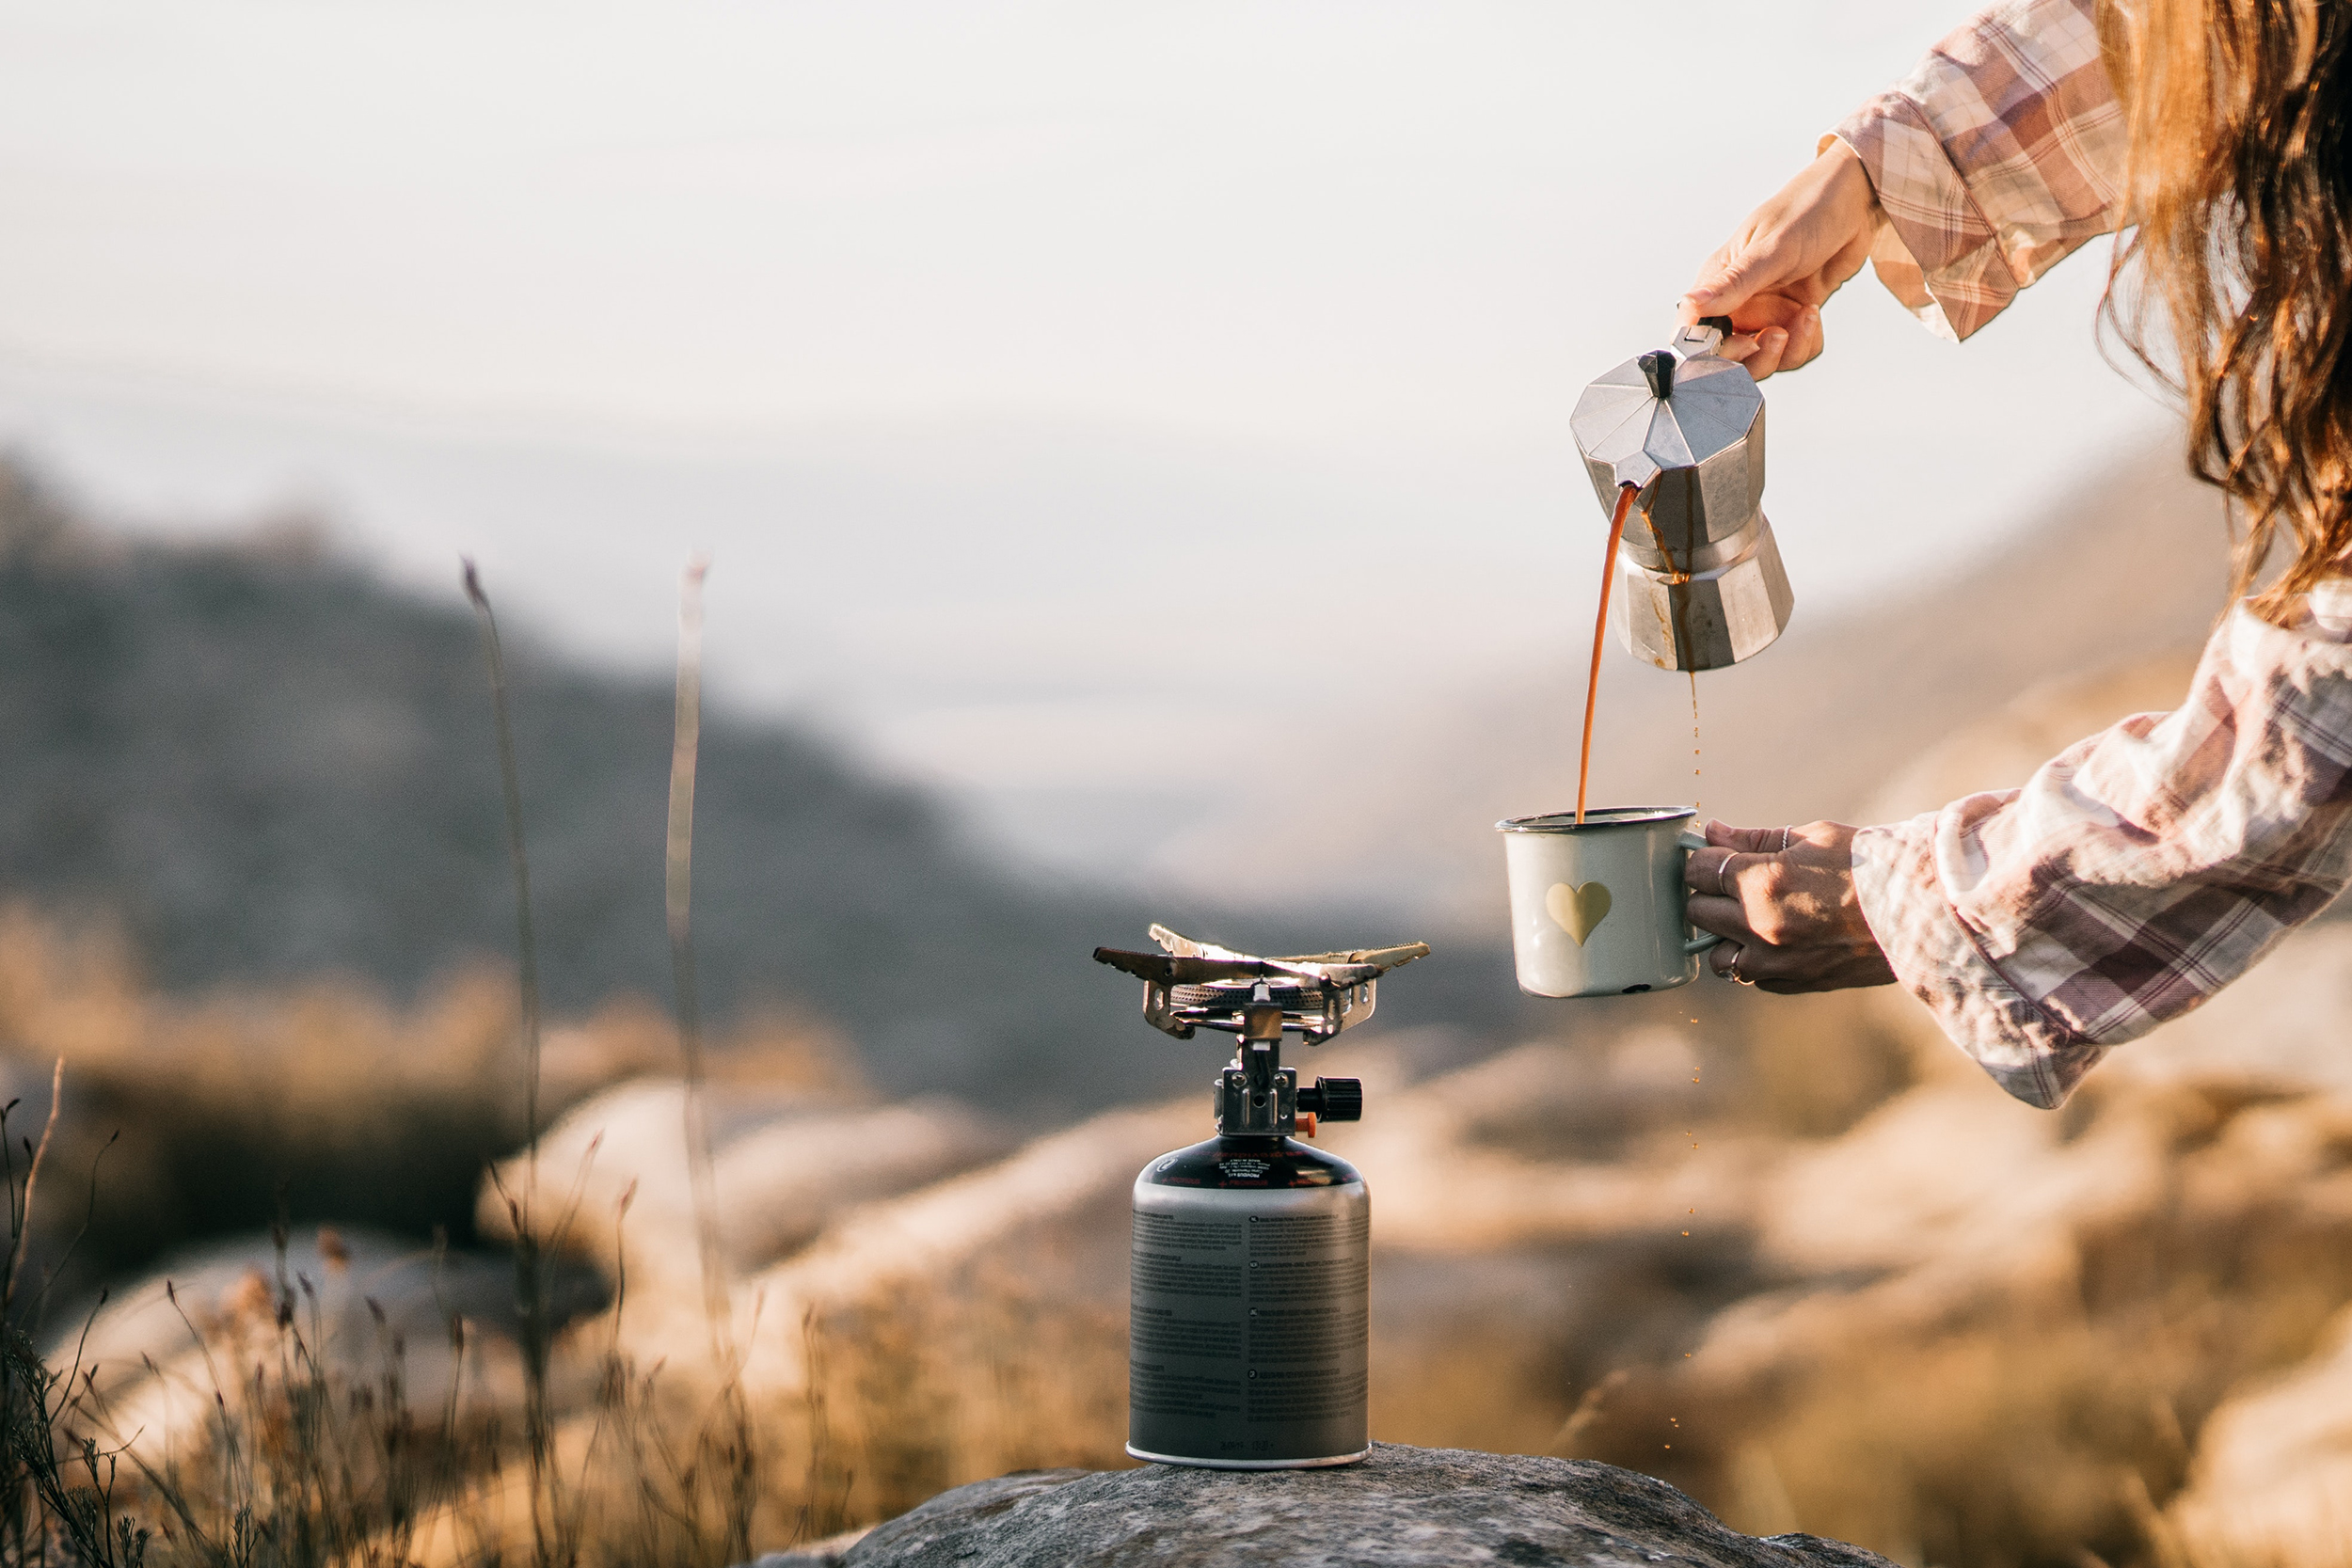 A person pouring coffee from a Mocha pot. Photo: Taryn Elliot via Pexels